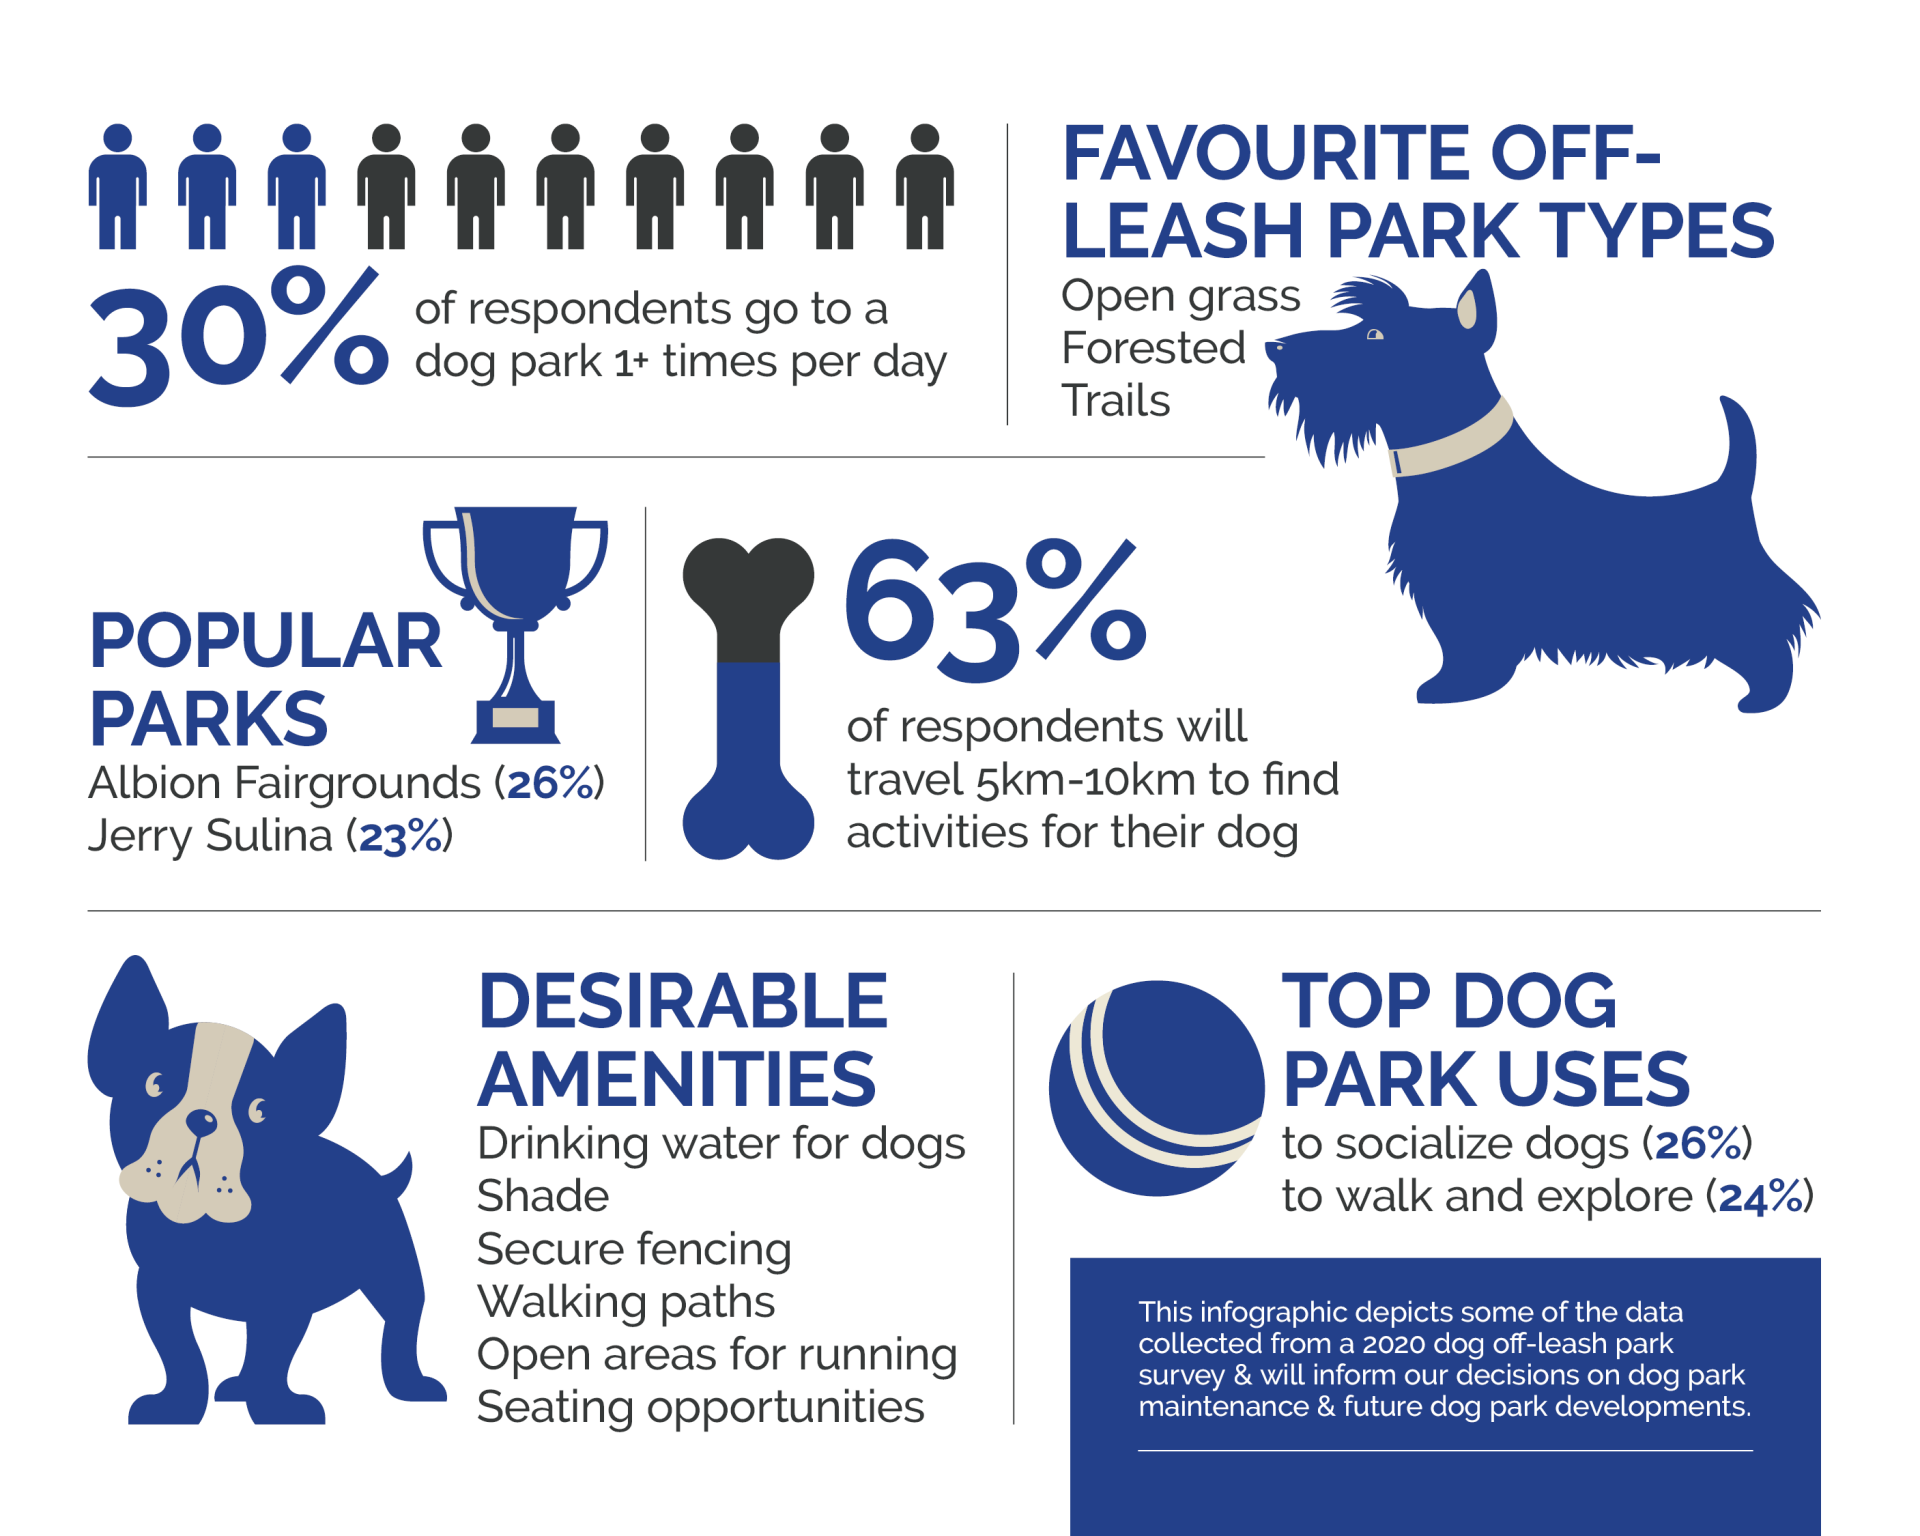 Dog park survey infographic displaying the results of the survey.